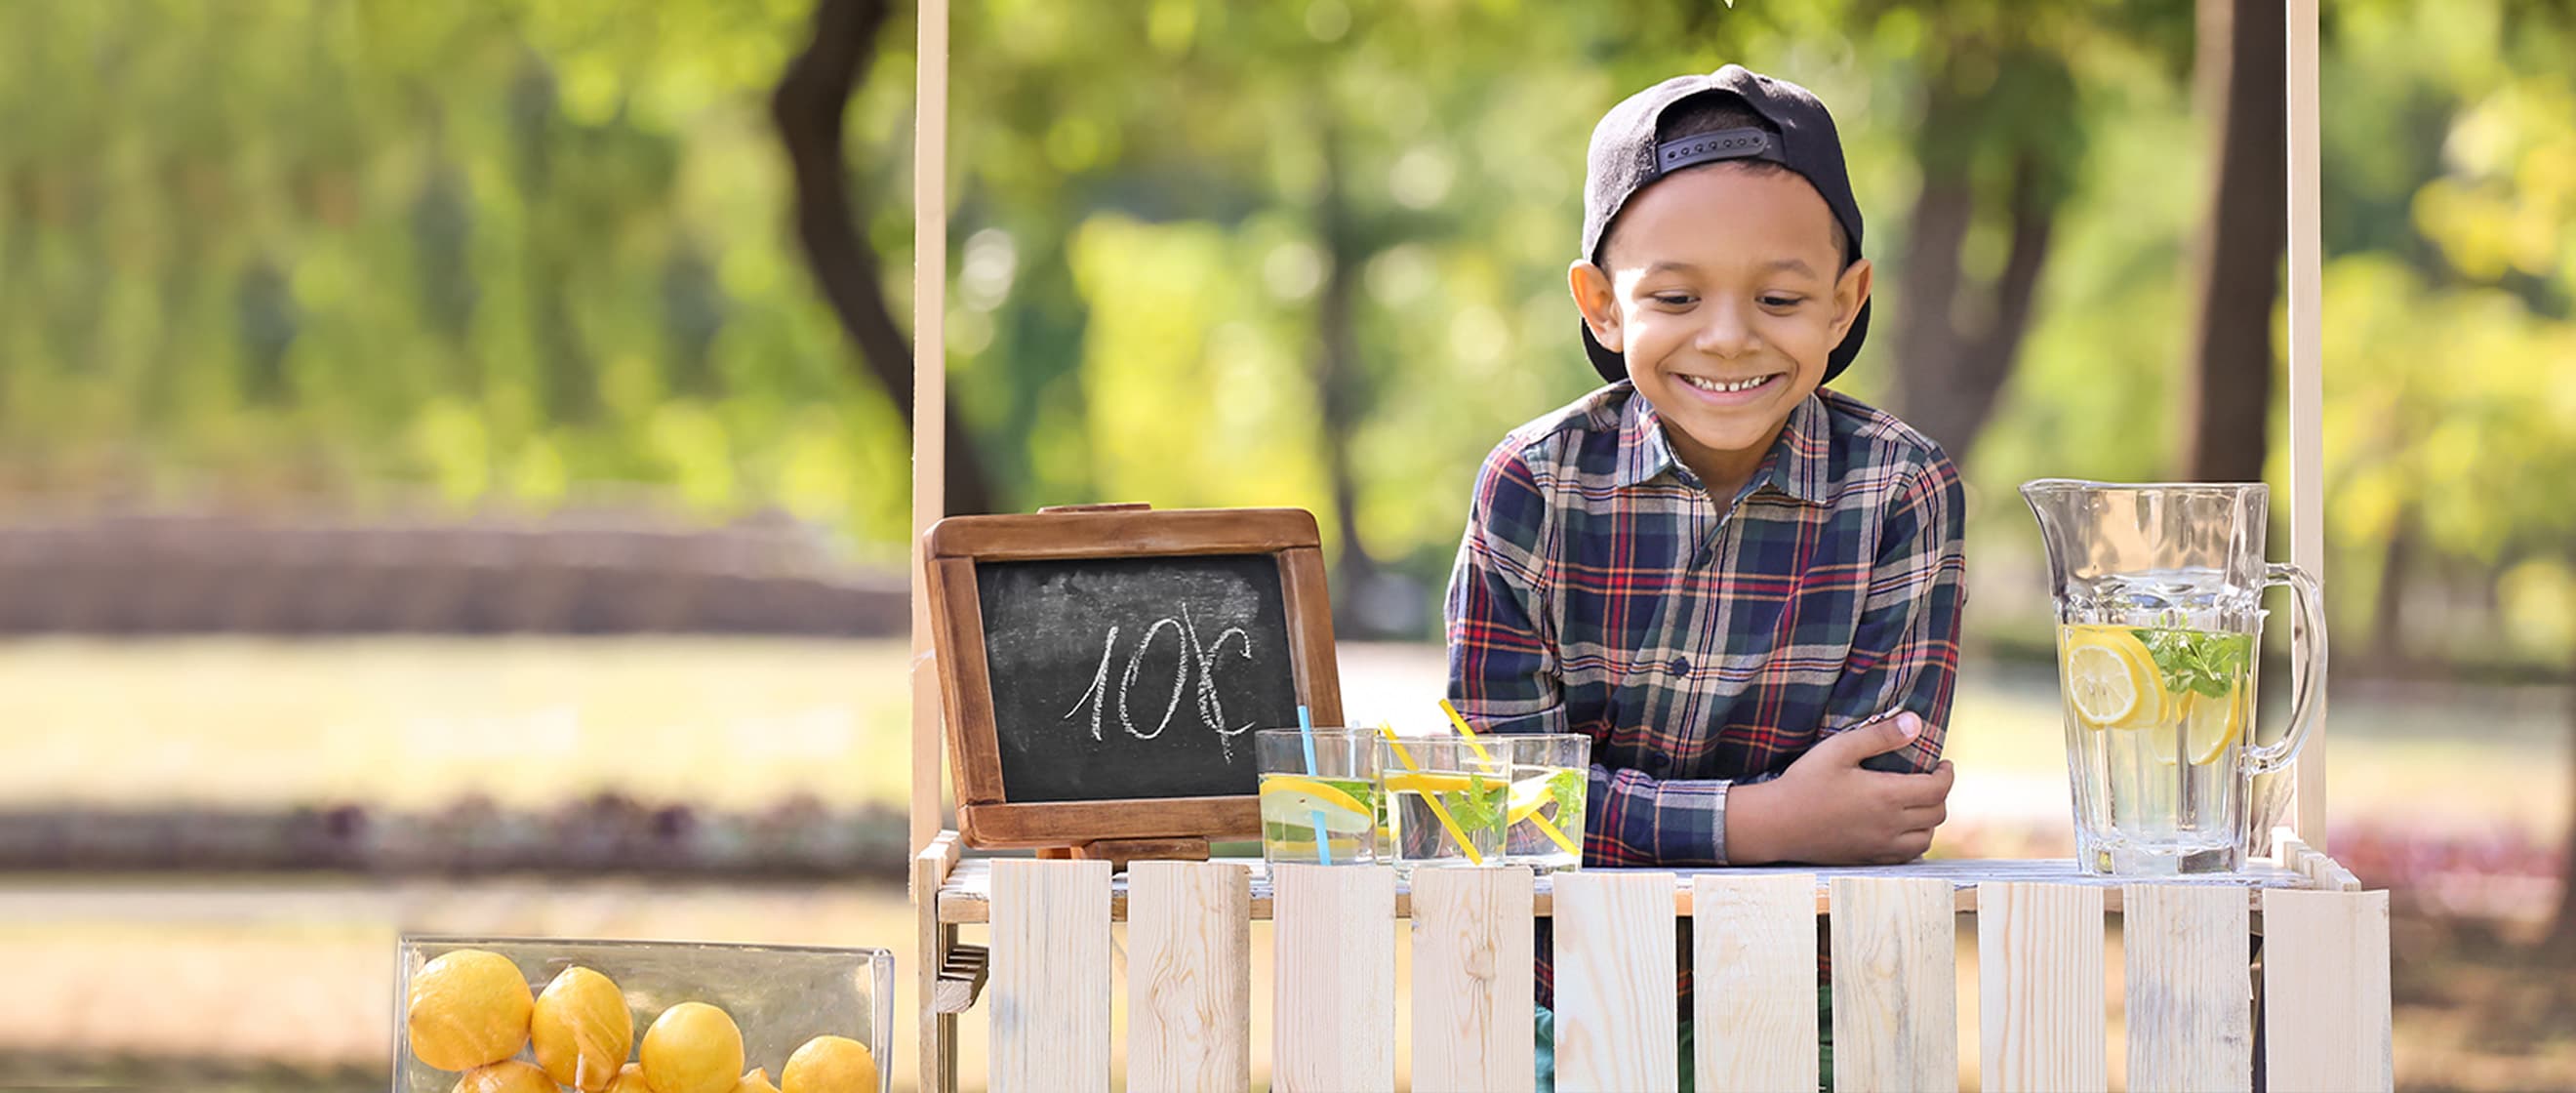 A young boy sits behind a lemonade stand placed outside in a park with trees.